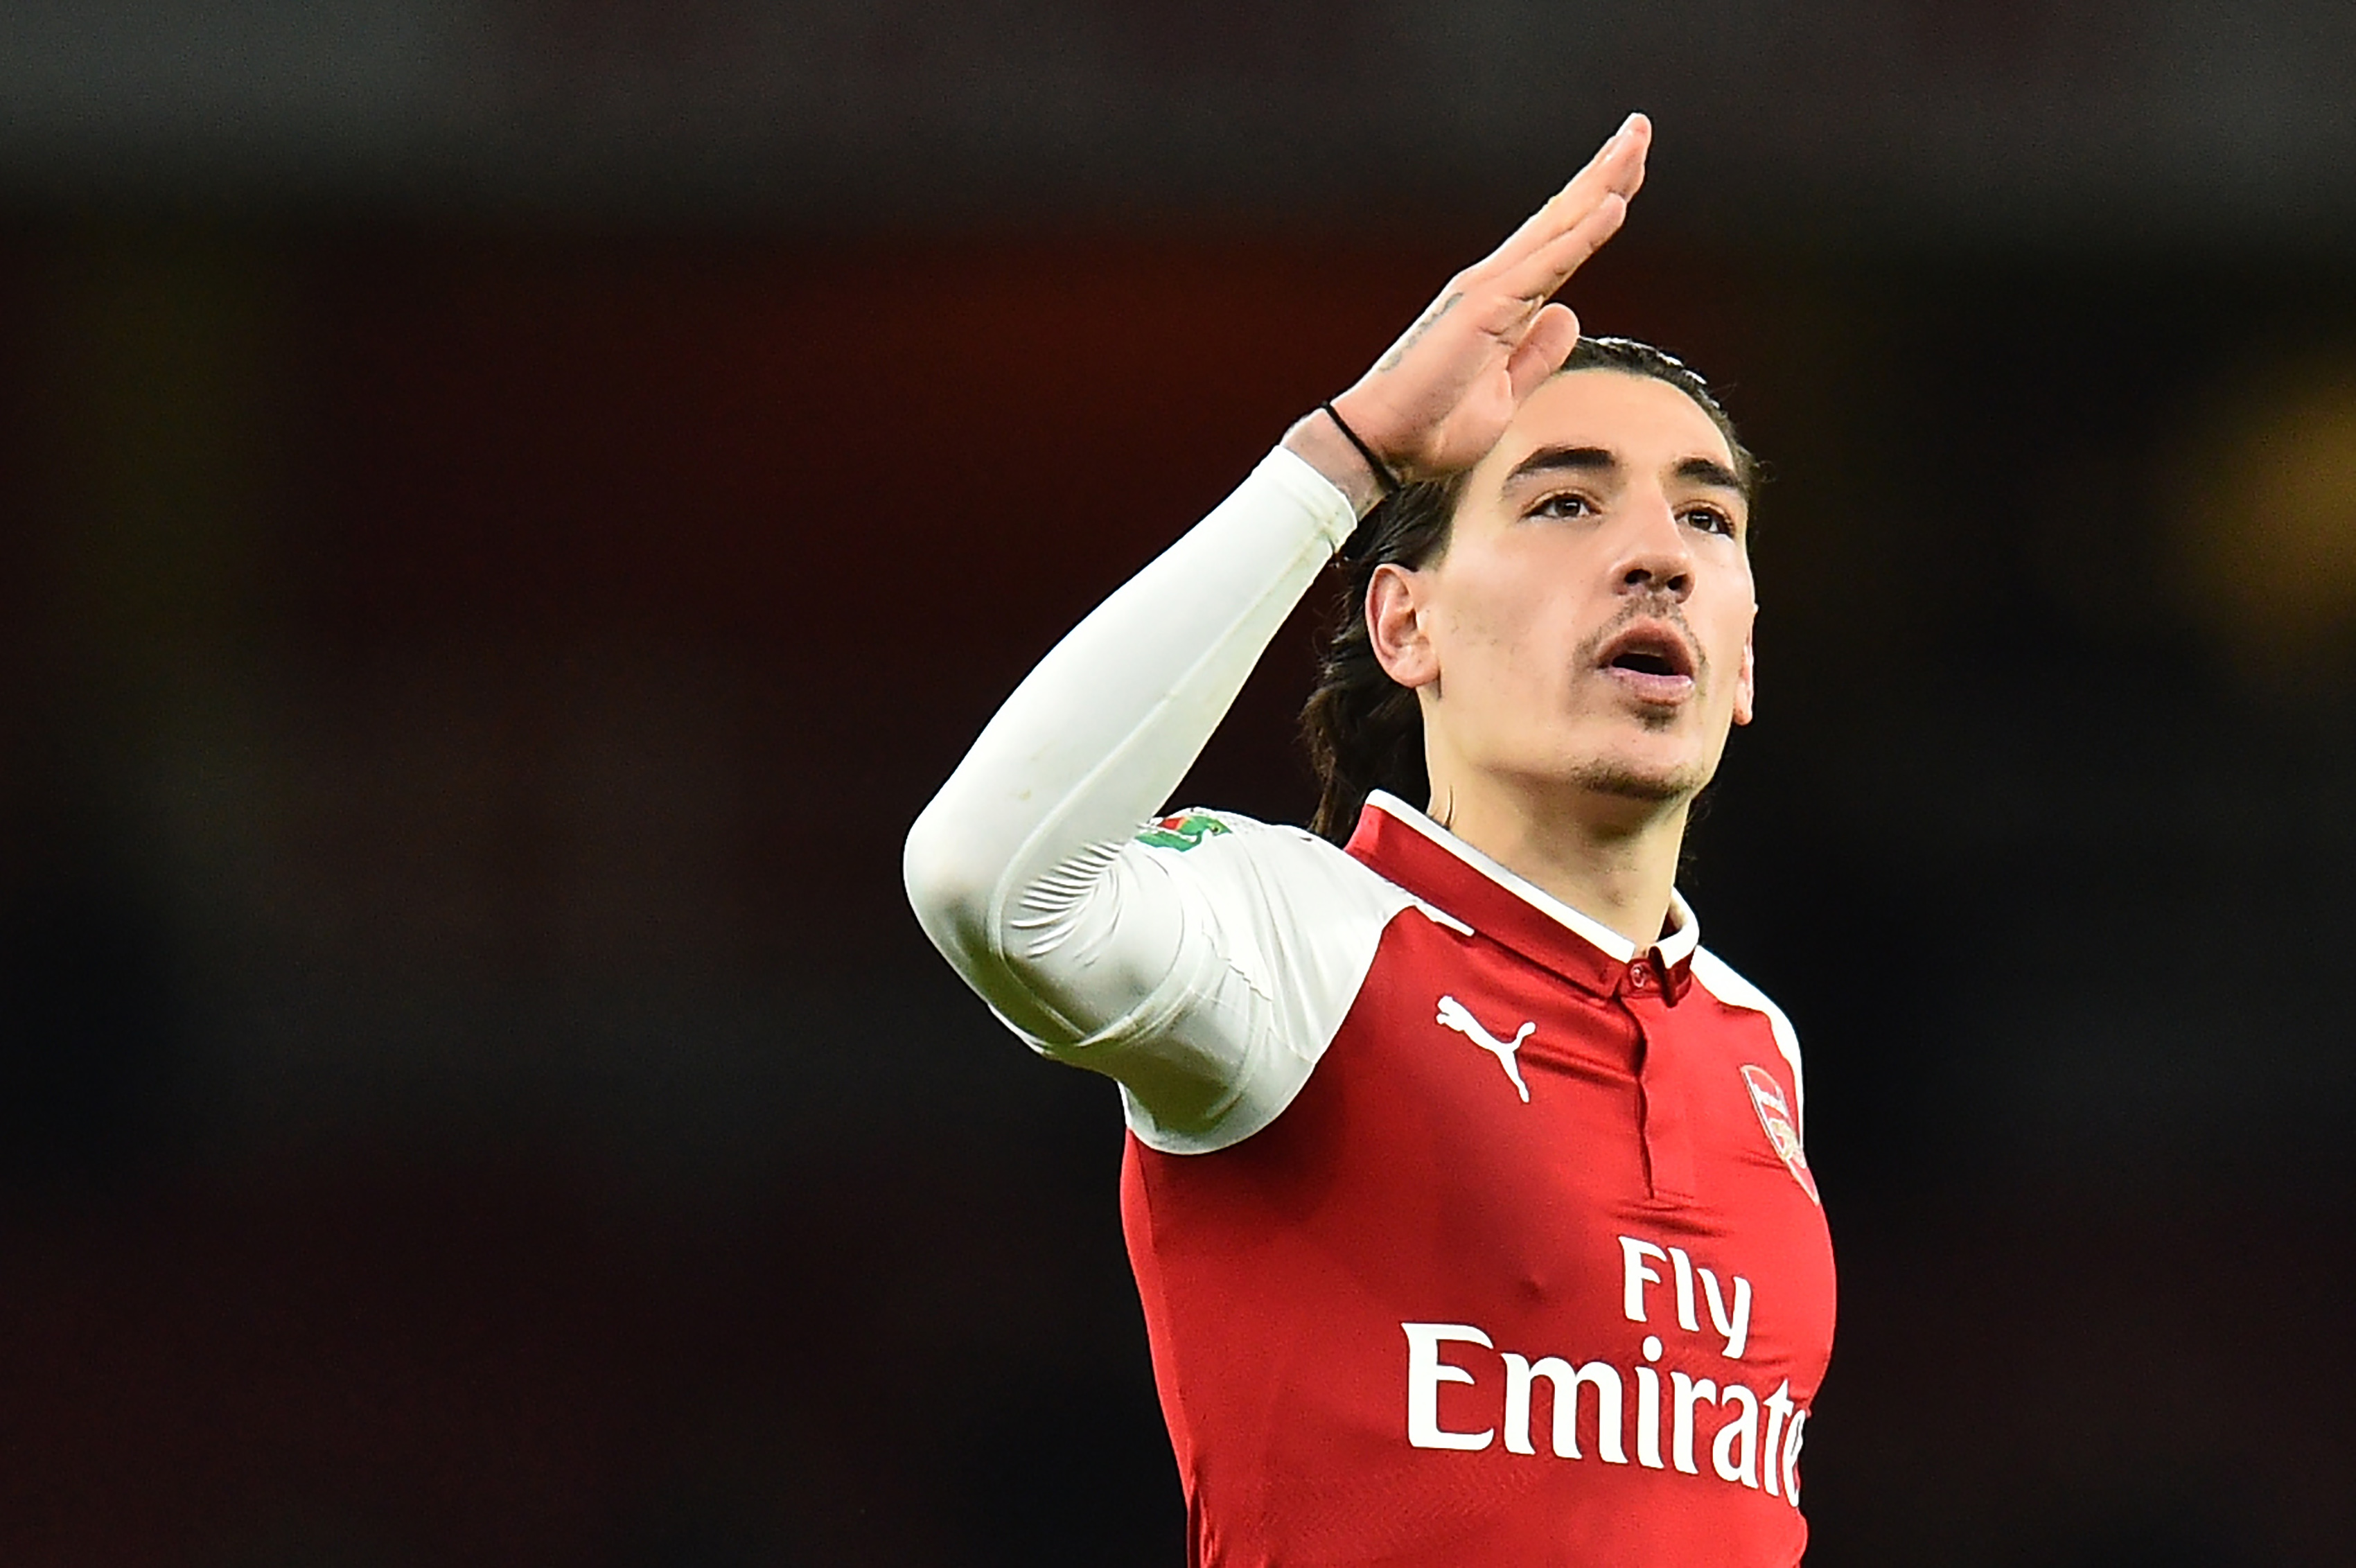 Arsenal's Spanish defender Hector Bellerin gestures at the final whistle during the League Cup semi-final football match between Arsenal and Chelsea at the Emirates Stadium in London on January 24, 2018.  / AFP PHOTO / Glyn KIRK / RESTRICTED TO EDITORIAL USE. No use with unauthorized audio, video, data, fixture lists, club/league logos or 'live' services. Online in-match use limited to 75 images, no video emulation. No use in betting, games or single club/league/player publications.  /         (Photo credit should read GLYN KIRK/AFP/Getty Images)